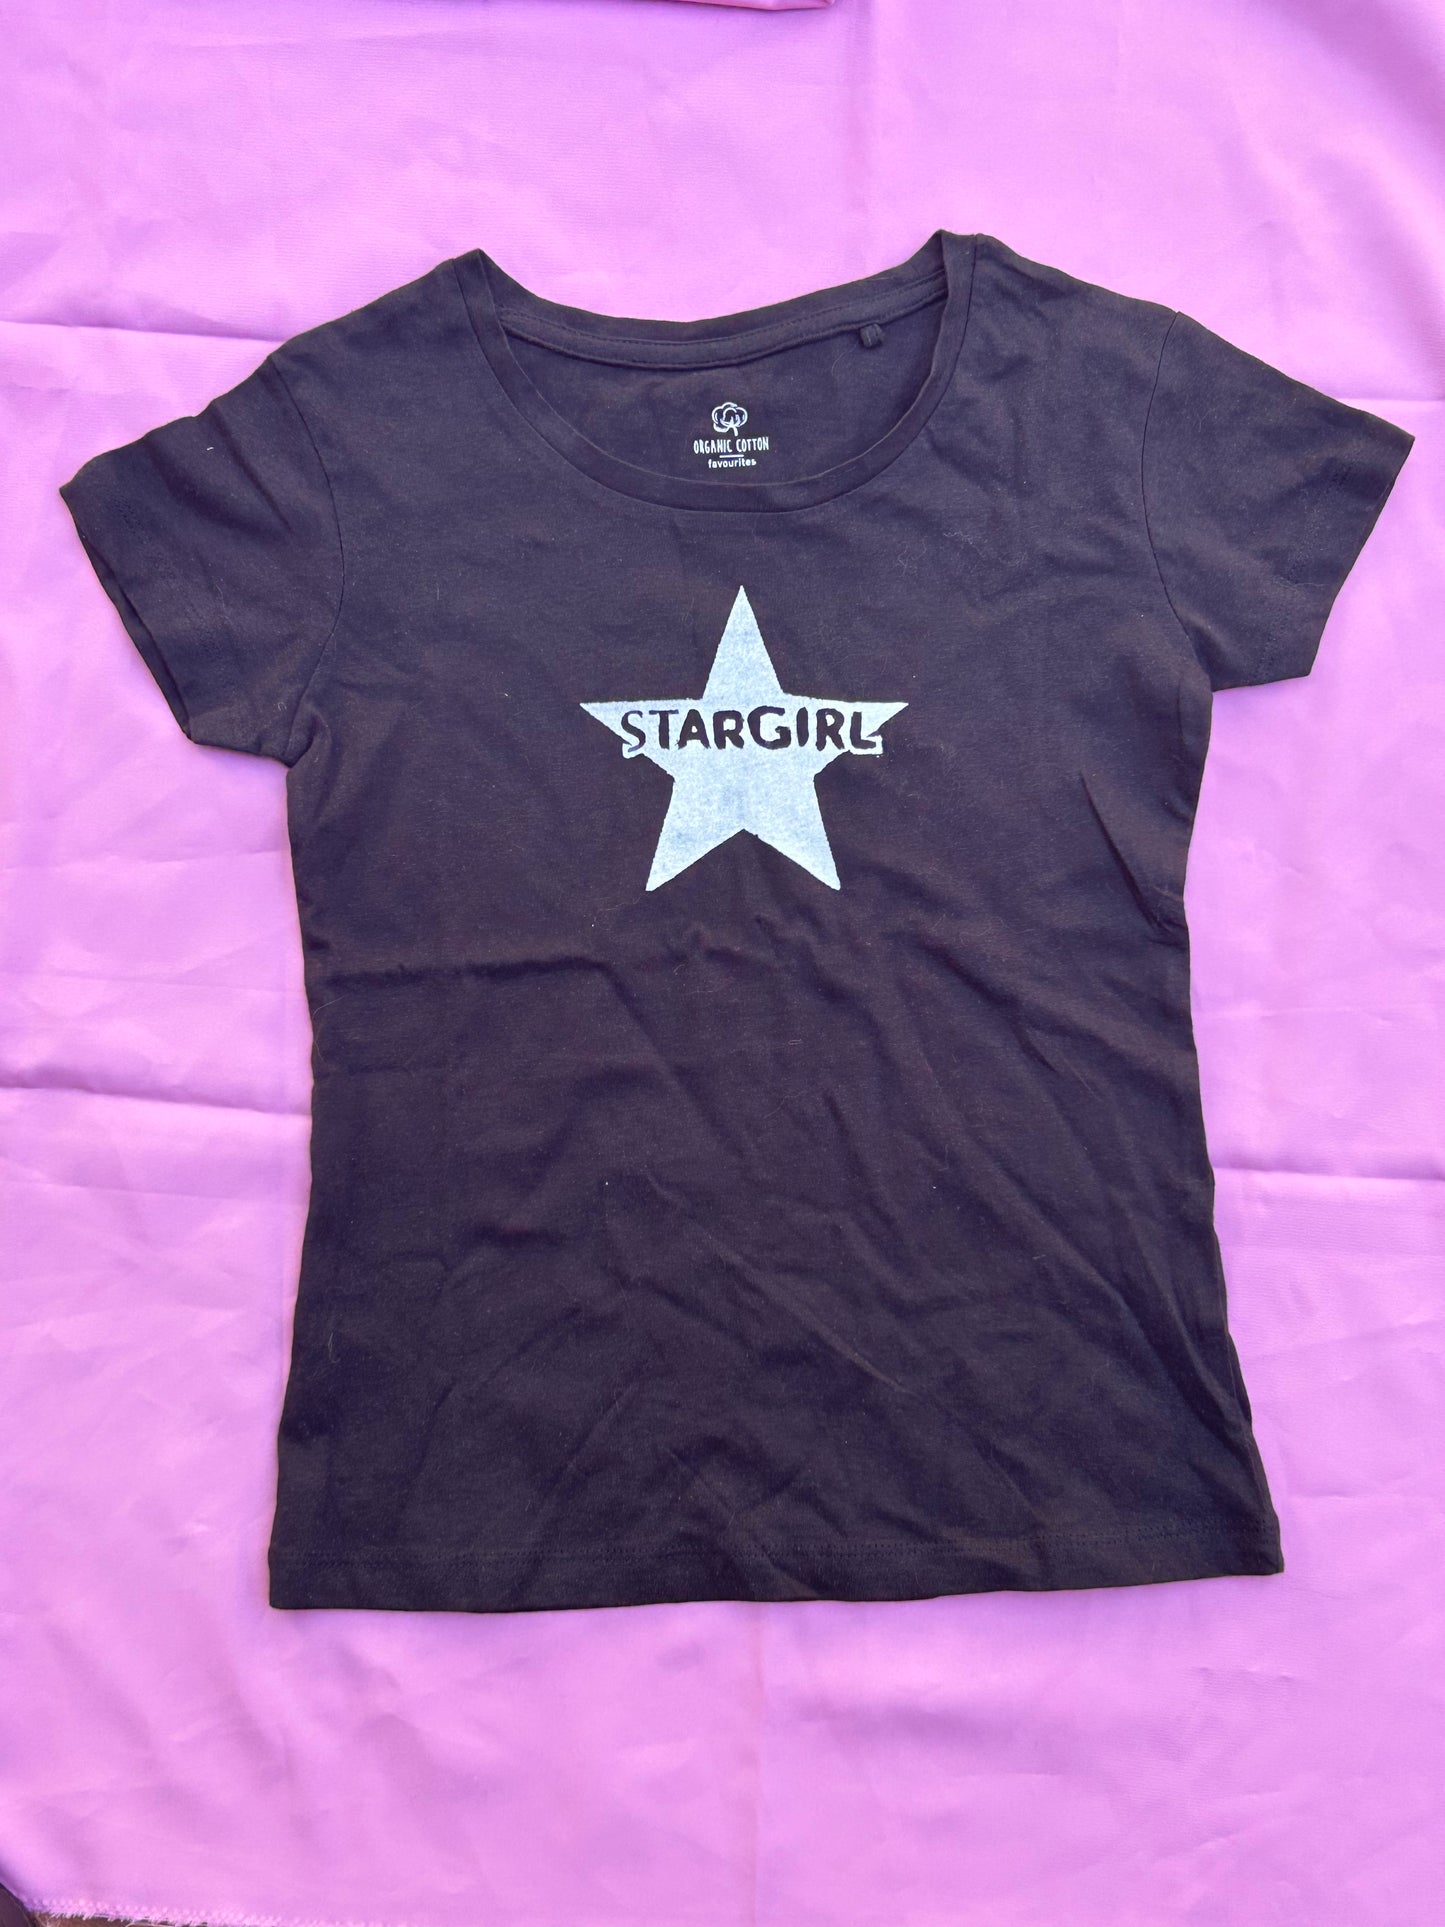 The star lover Baby Tee